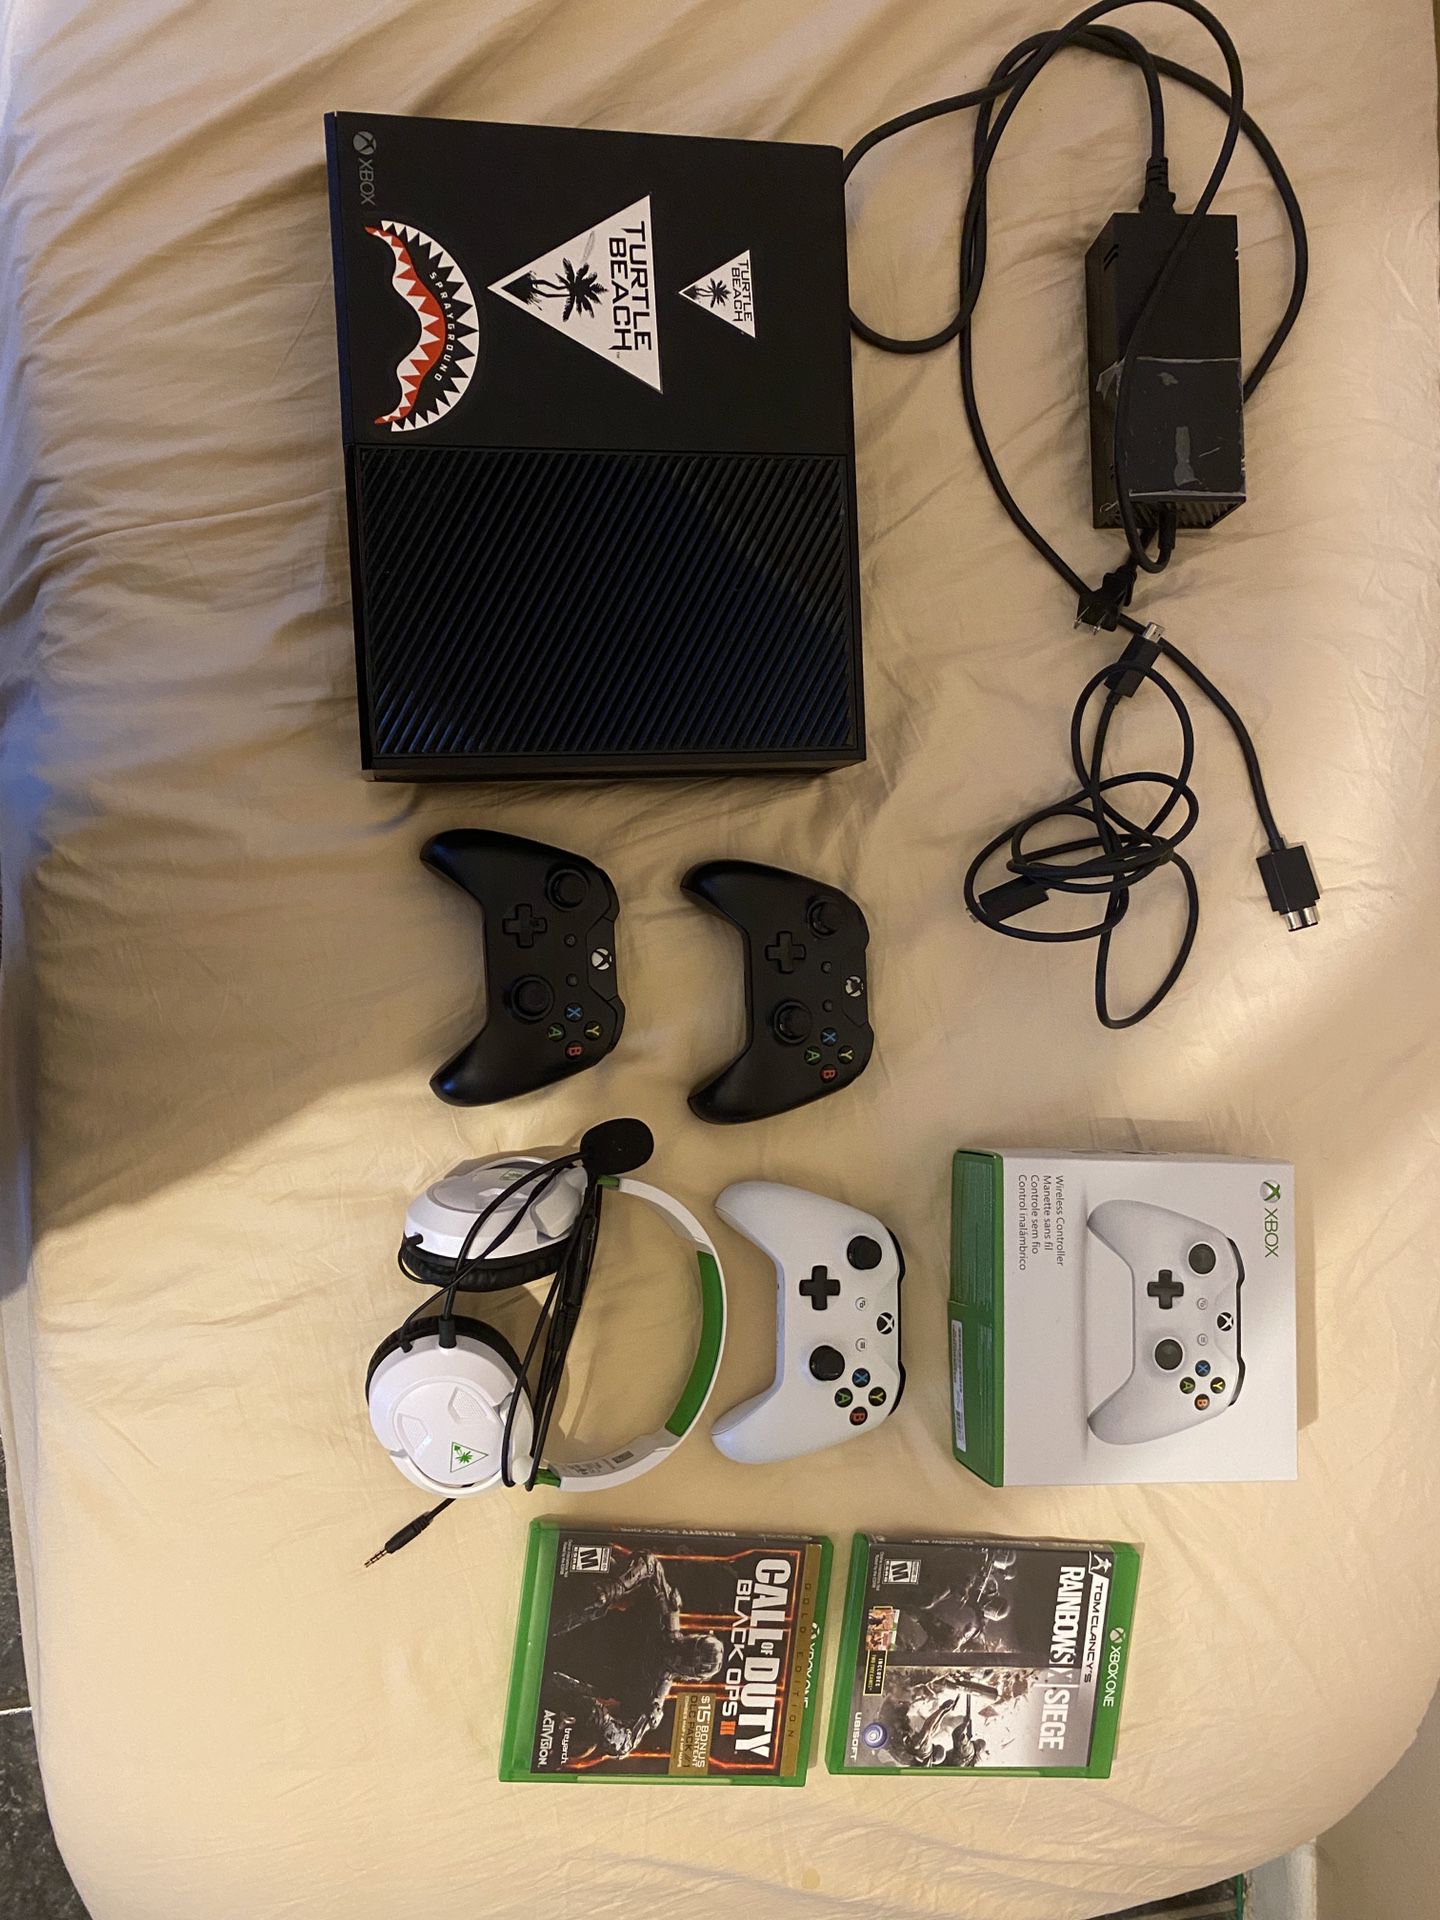 Xbox One 500 GB with additional items